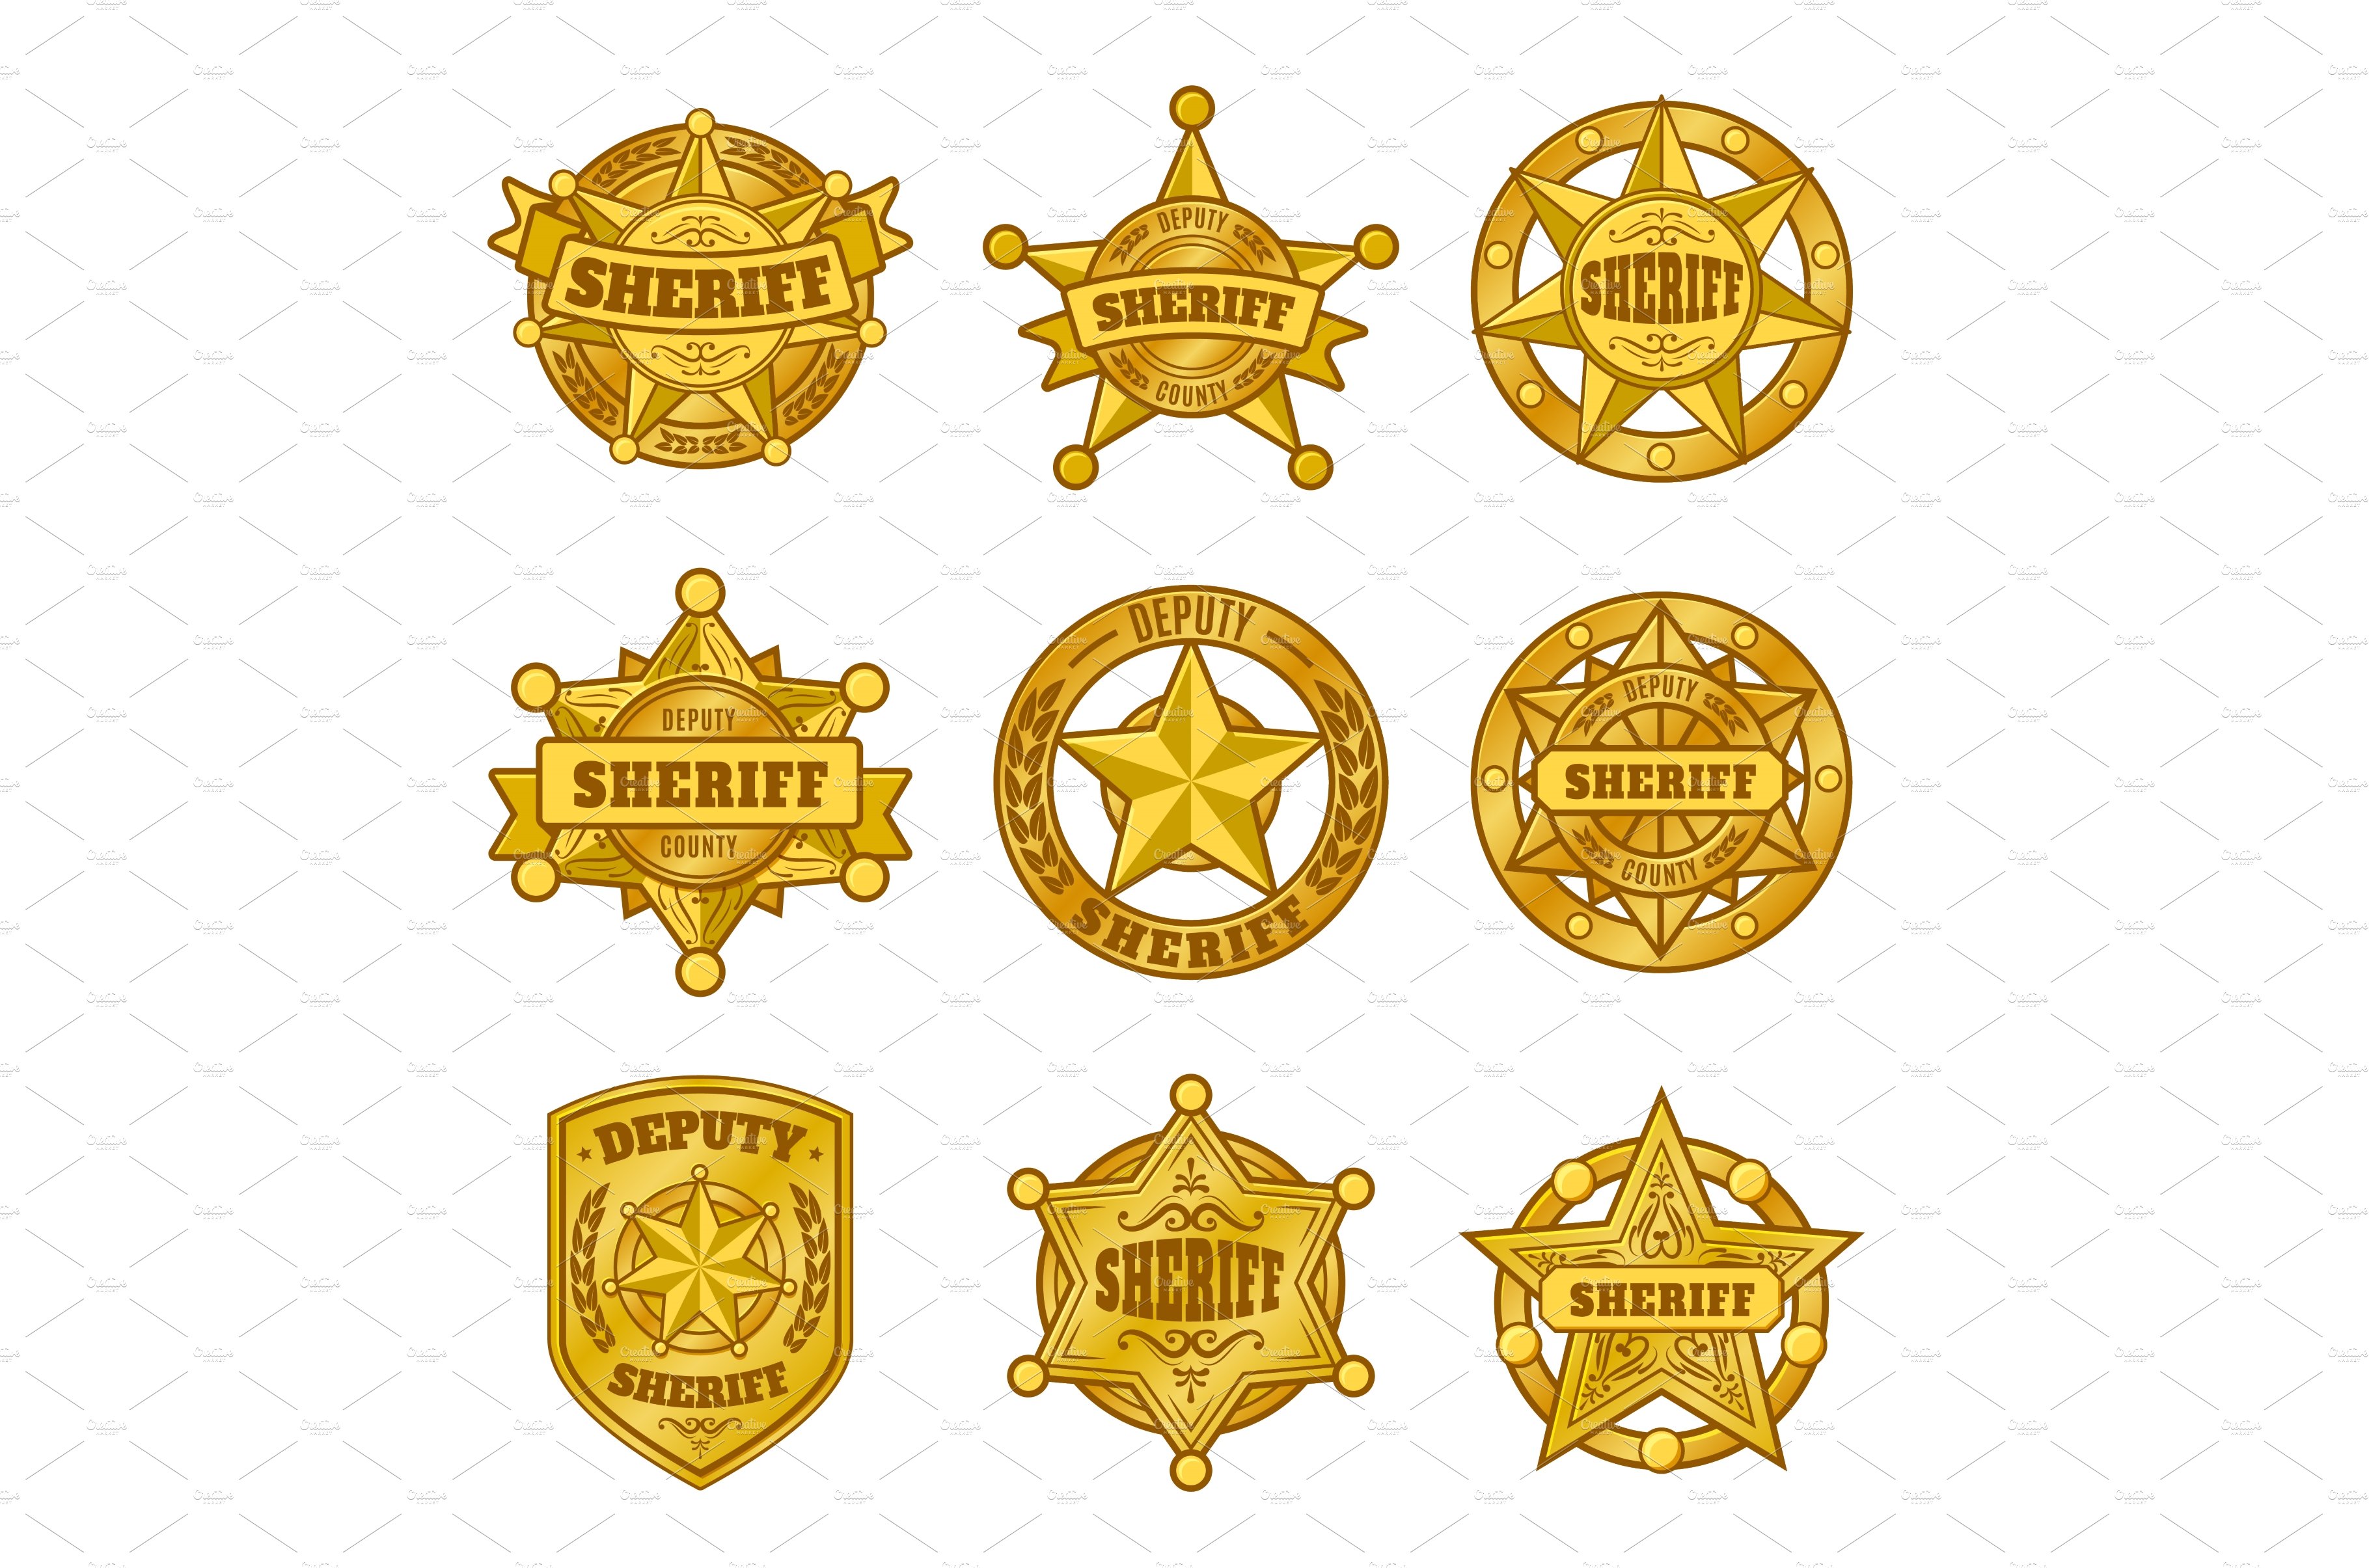 Sheriff badges. Police department cover image.